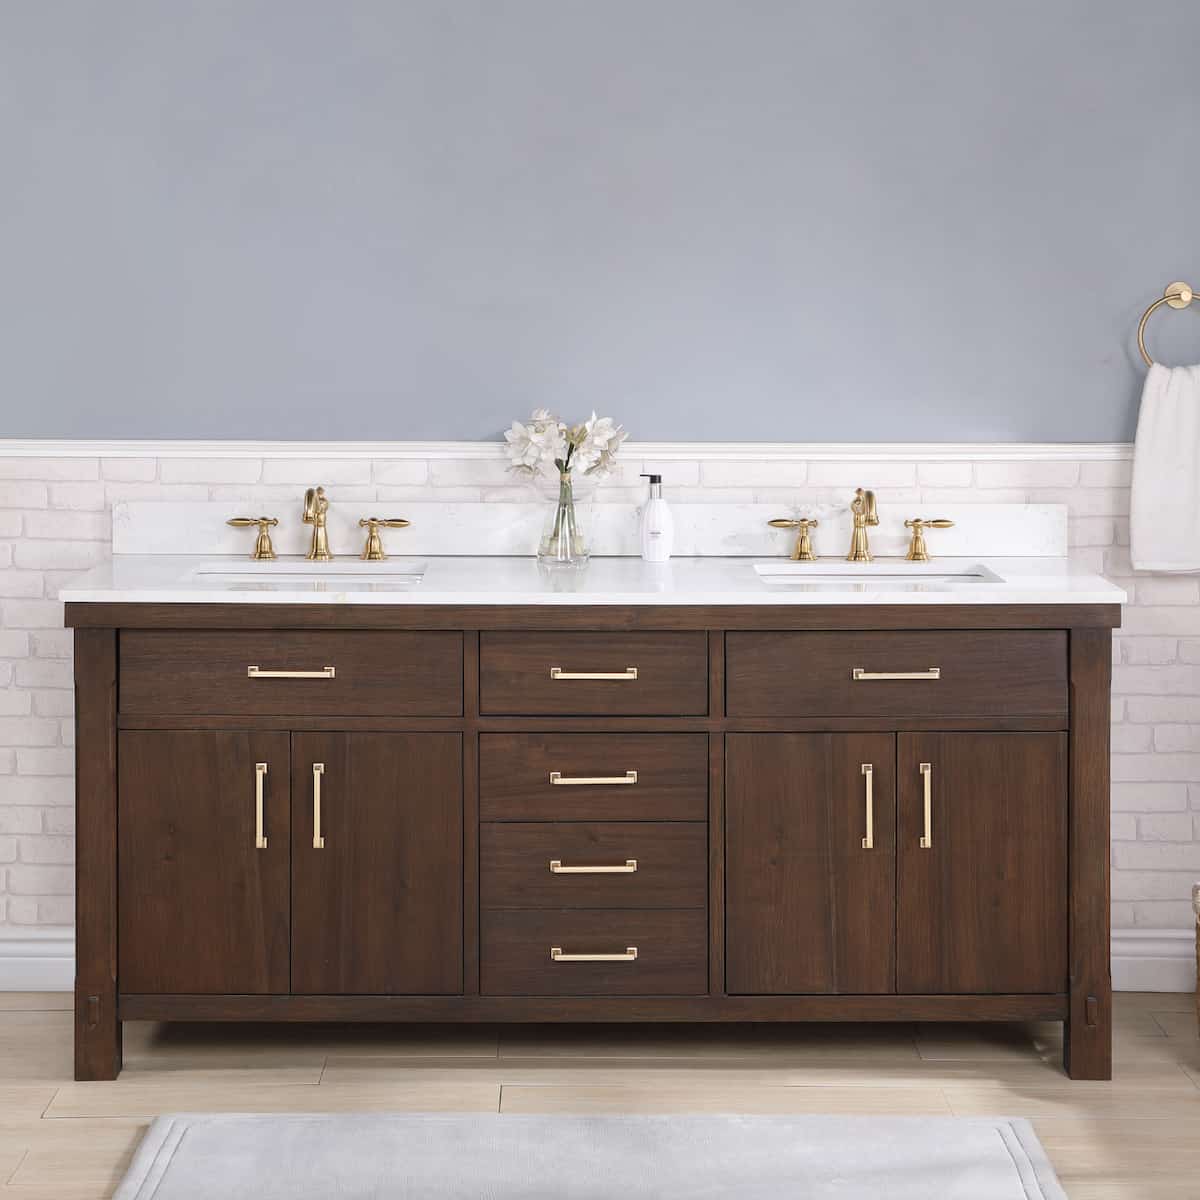 Vinnova Viella 72 Inch Freestanding Double Sink Bath Vanity in Deep Walnut Finish with White Composite Countertop Without Mirror in Bathroom 701872-DW-WS-NM